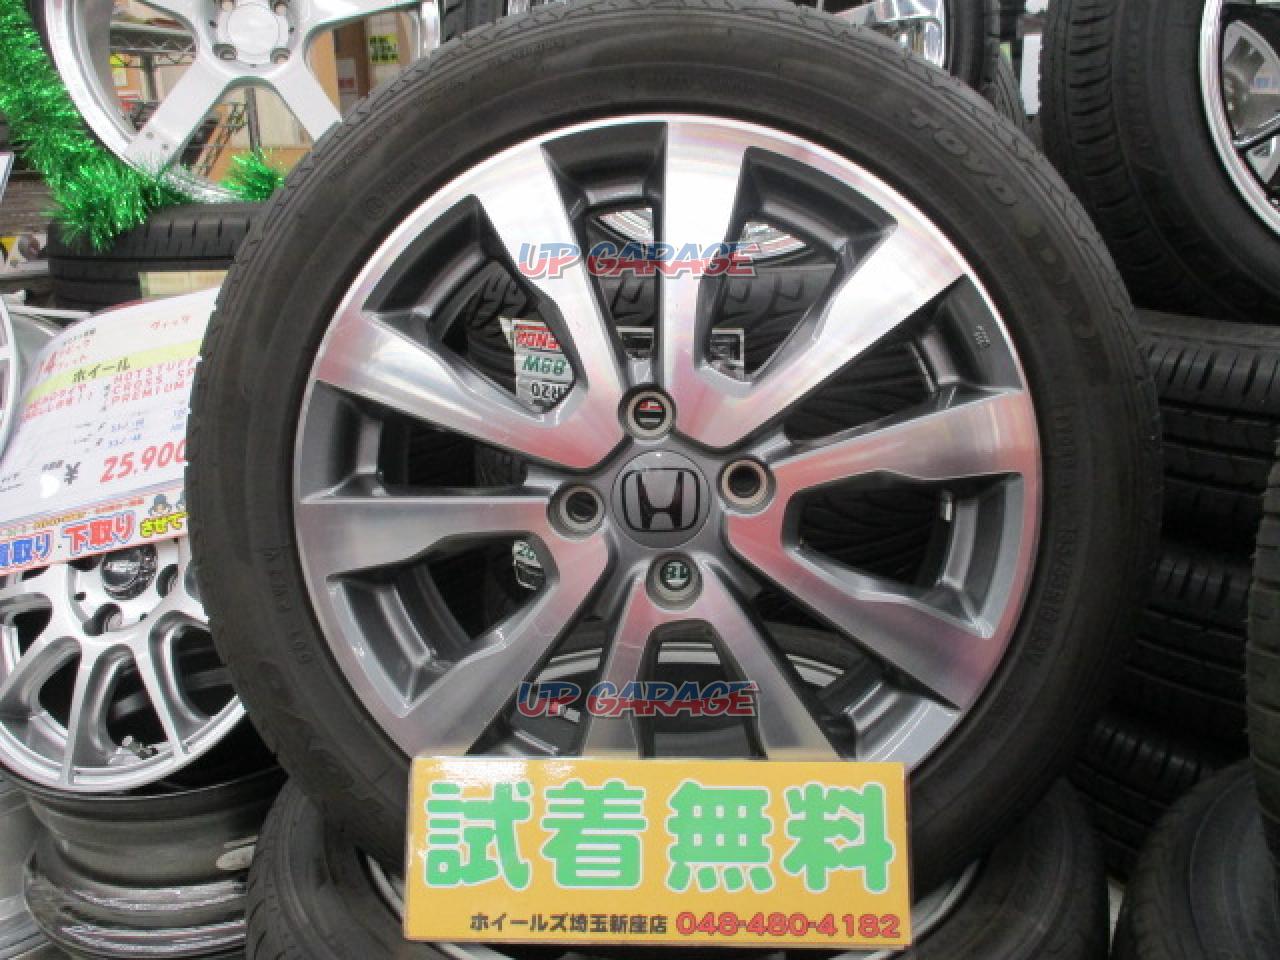 Honda Ge8 Fit Rs Late Wheel Toyo Drb Genuine Diversion 6 0jx16 4h For Sale Croooober